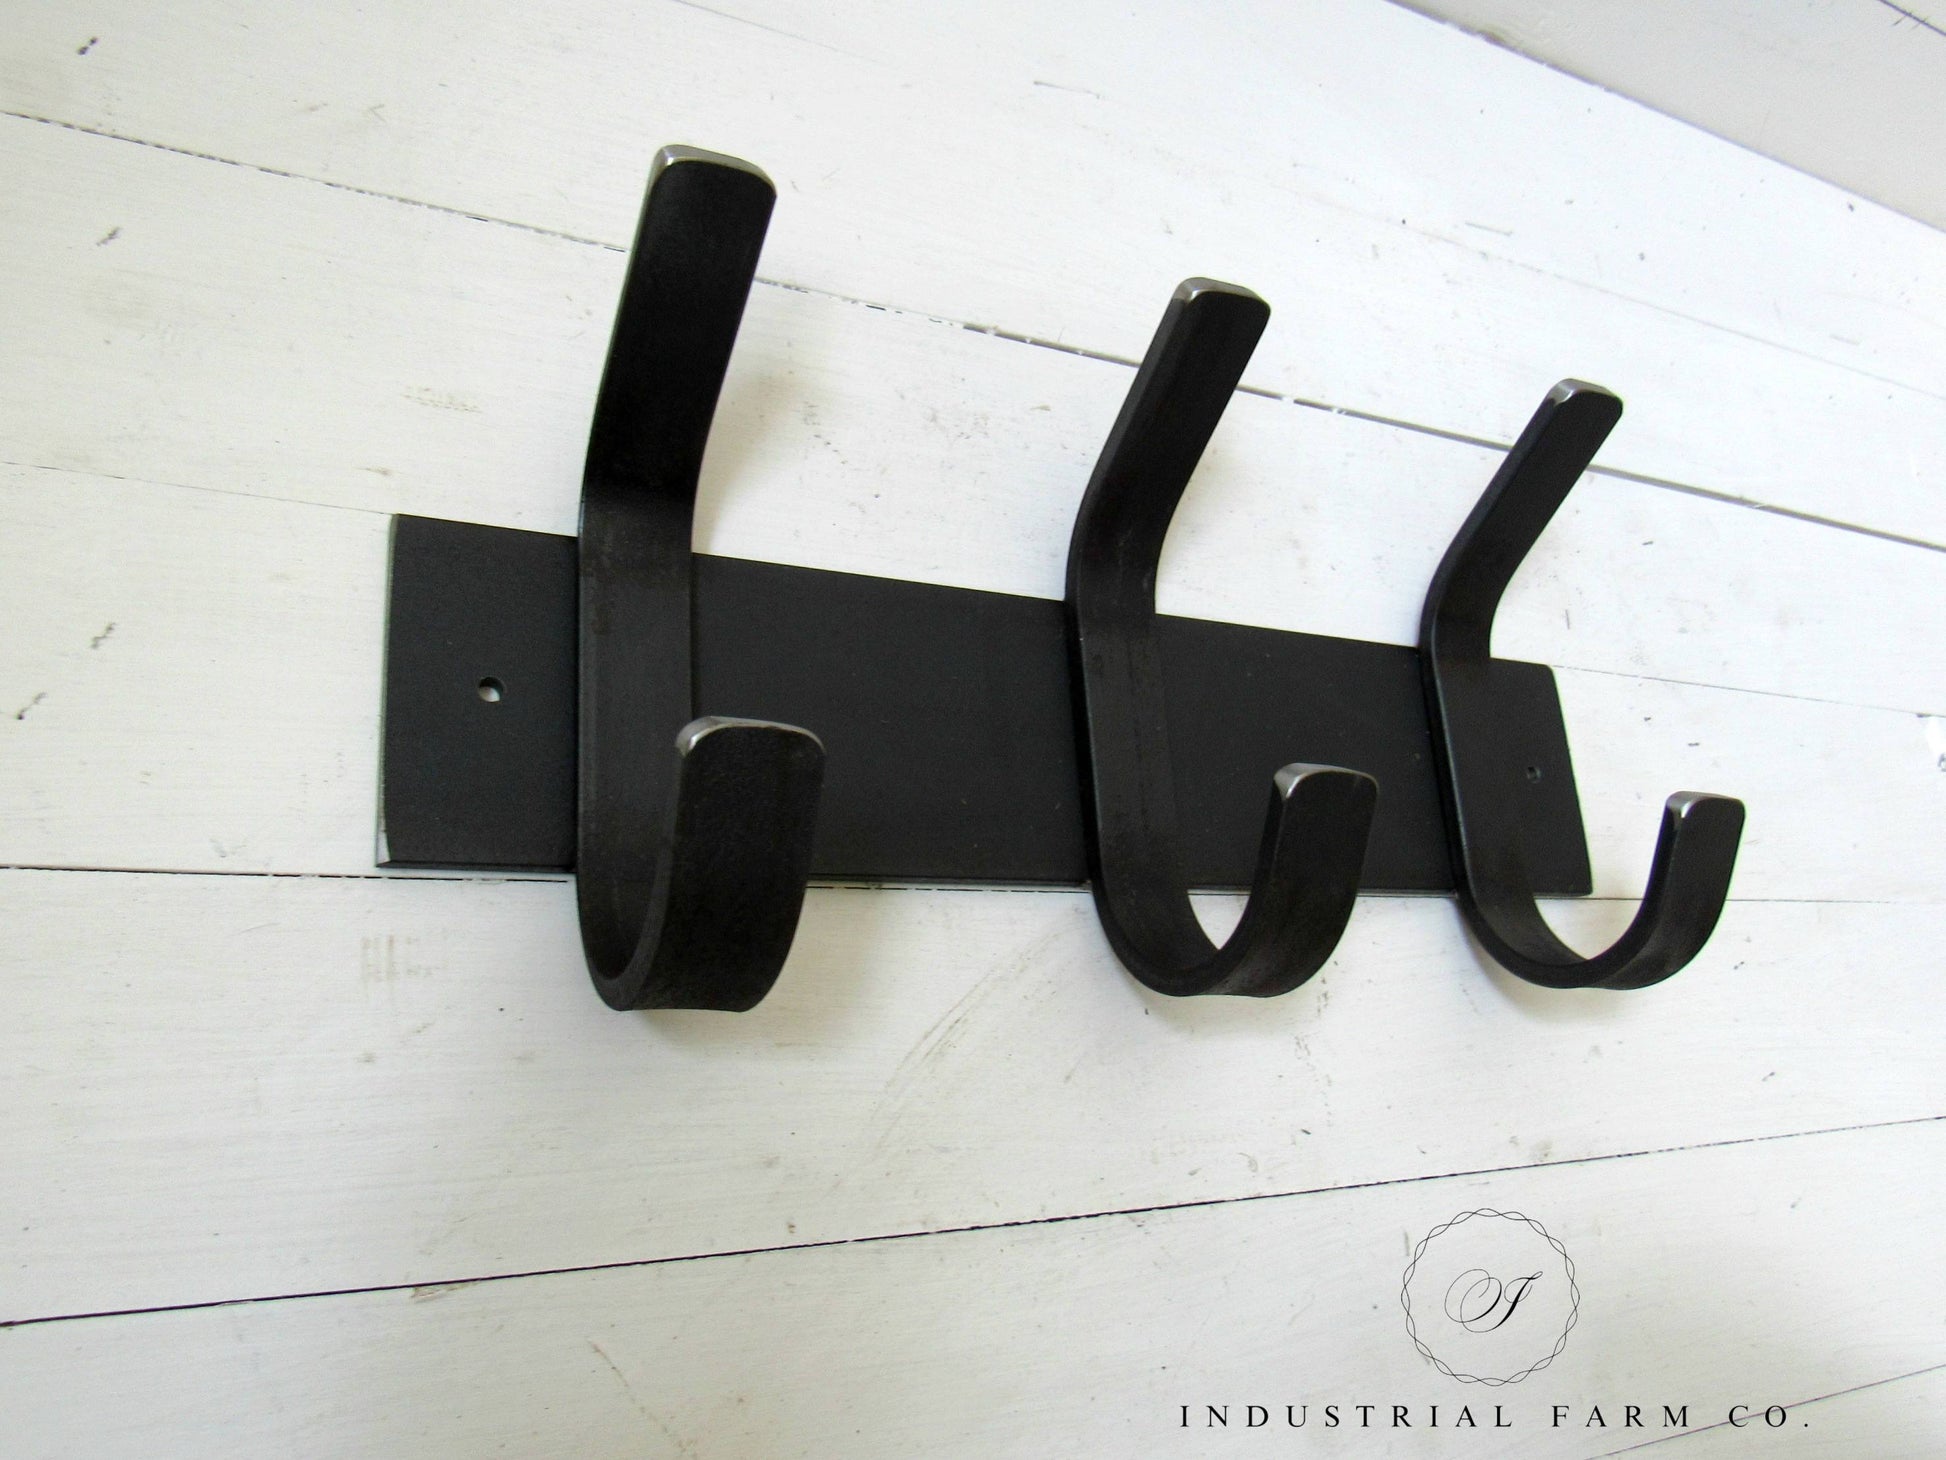 The Riseform Wall Mounted Metal Coat Rack - Industrial Farm Co